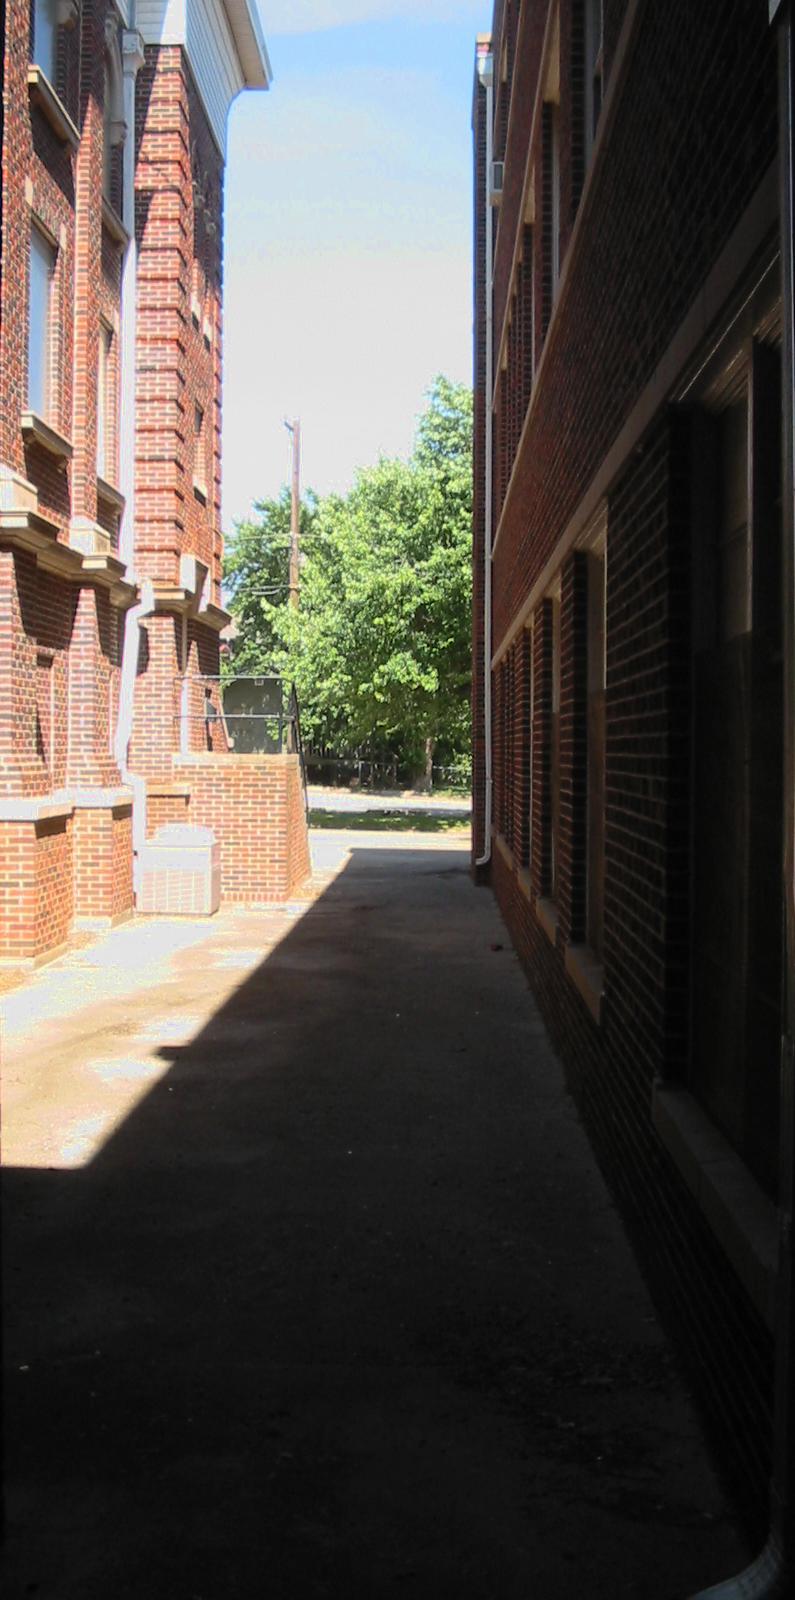 a sidewalk in an alley with no people